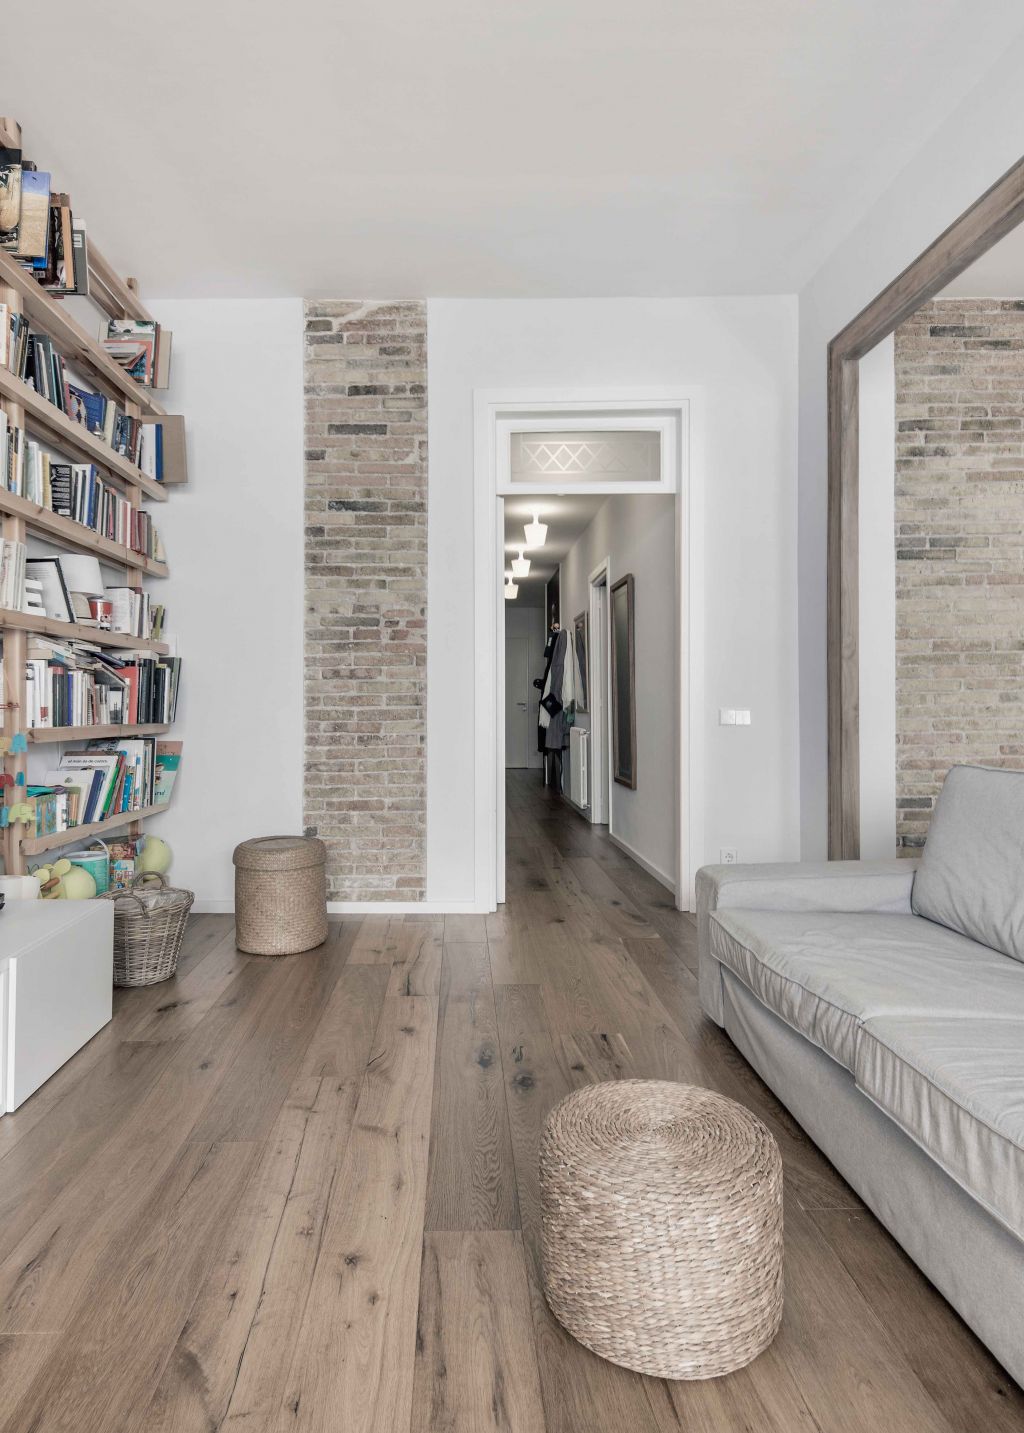 FULL RENOVATION OF A FLAT IN EIXAMPLE 2